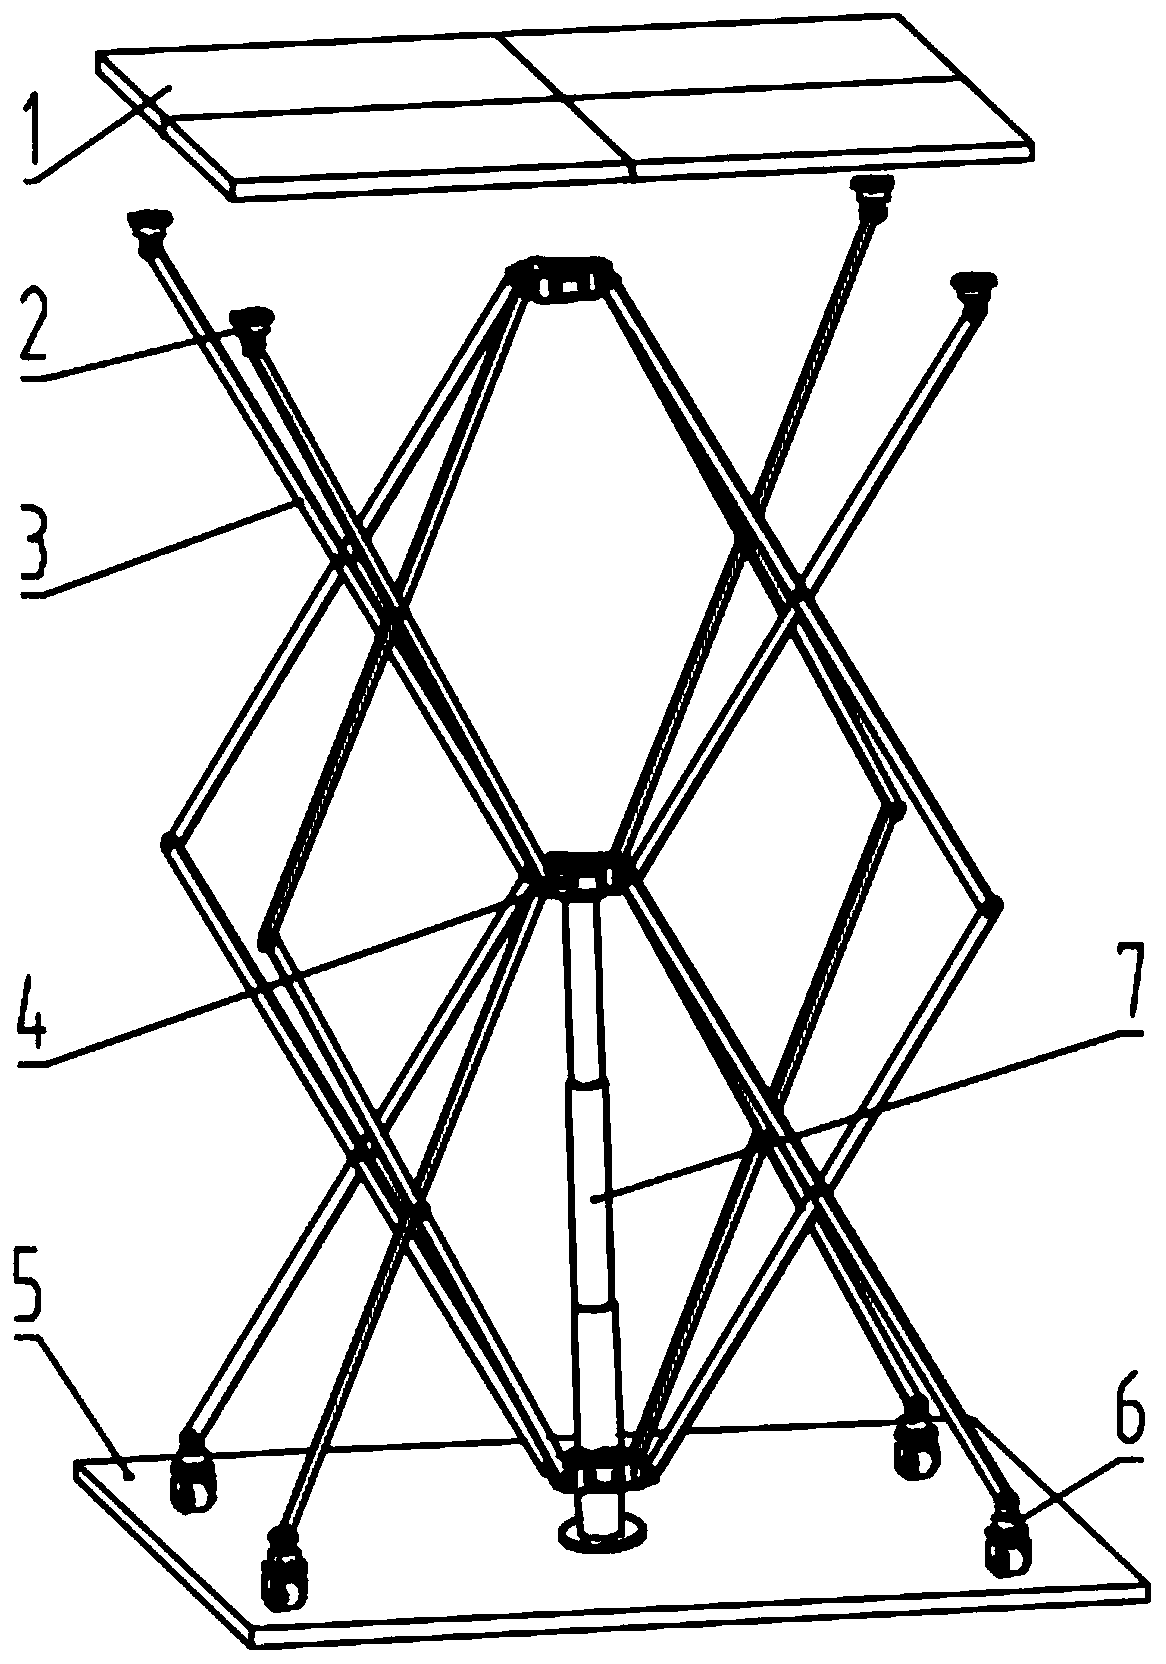 A mast-driven cross scissor lifting mechanism with adjustable argument angle